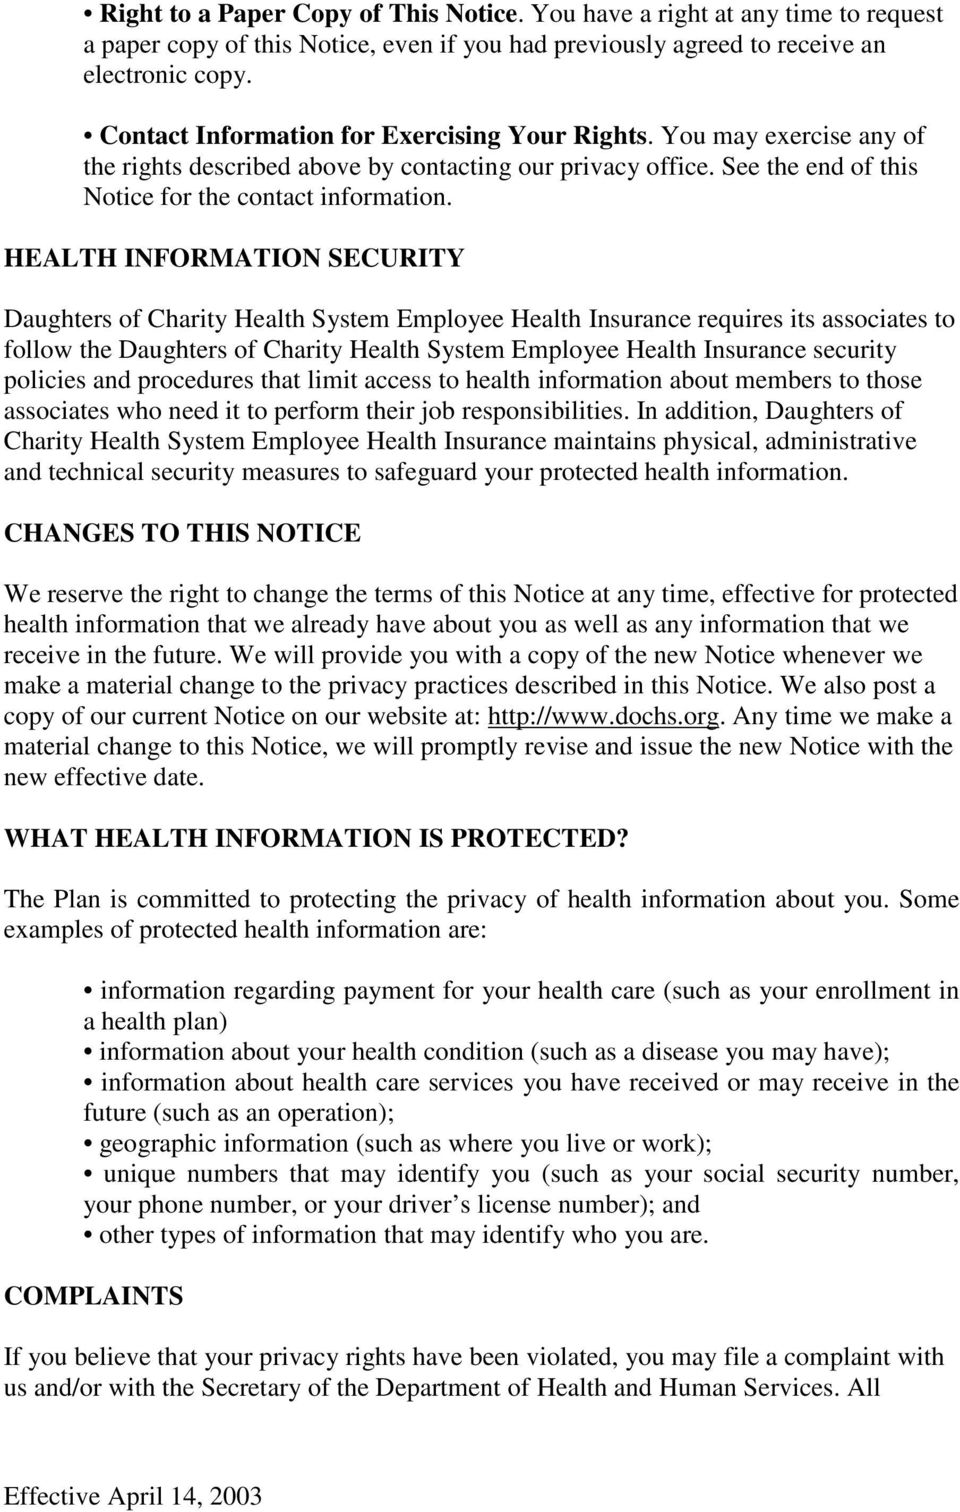 HEALTH INFORMATION SECURITY Daughters of Charity Health System Employee Health Insurance requires its associates to follow the Daughters of Charity Health System Employee Health Insurance security